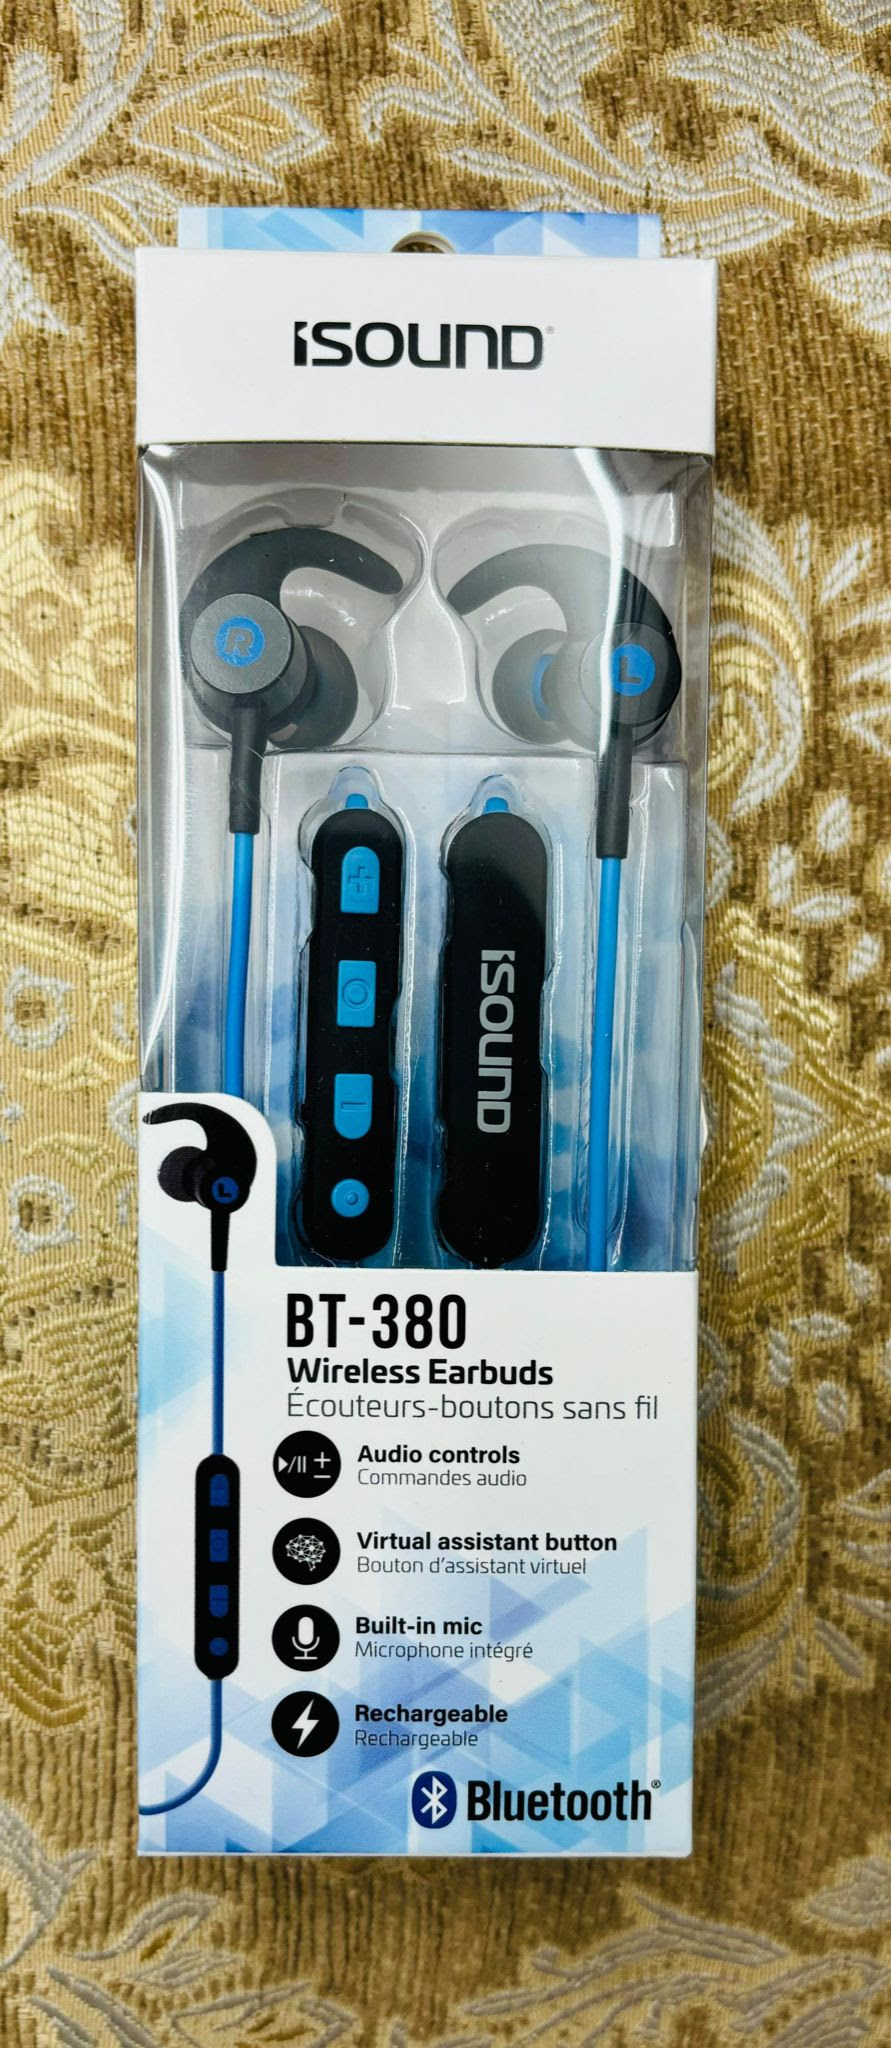 iSound BT-380 Bluetooth Stereo Earbuds With Microphone. 35,000units. EXW Los Angeles $1.75unit.